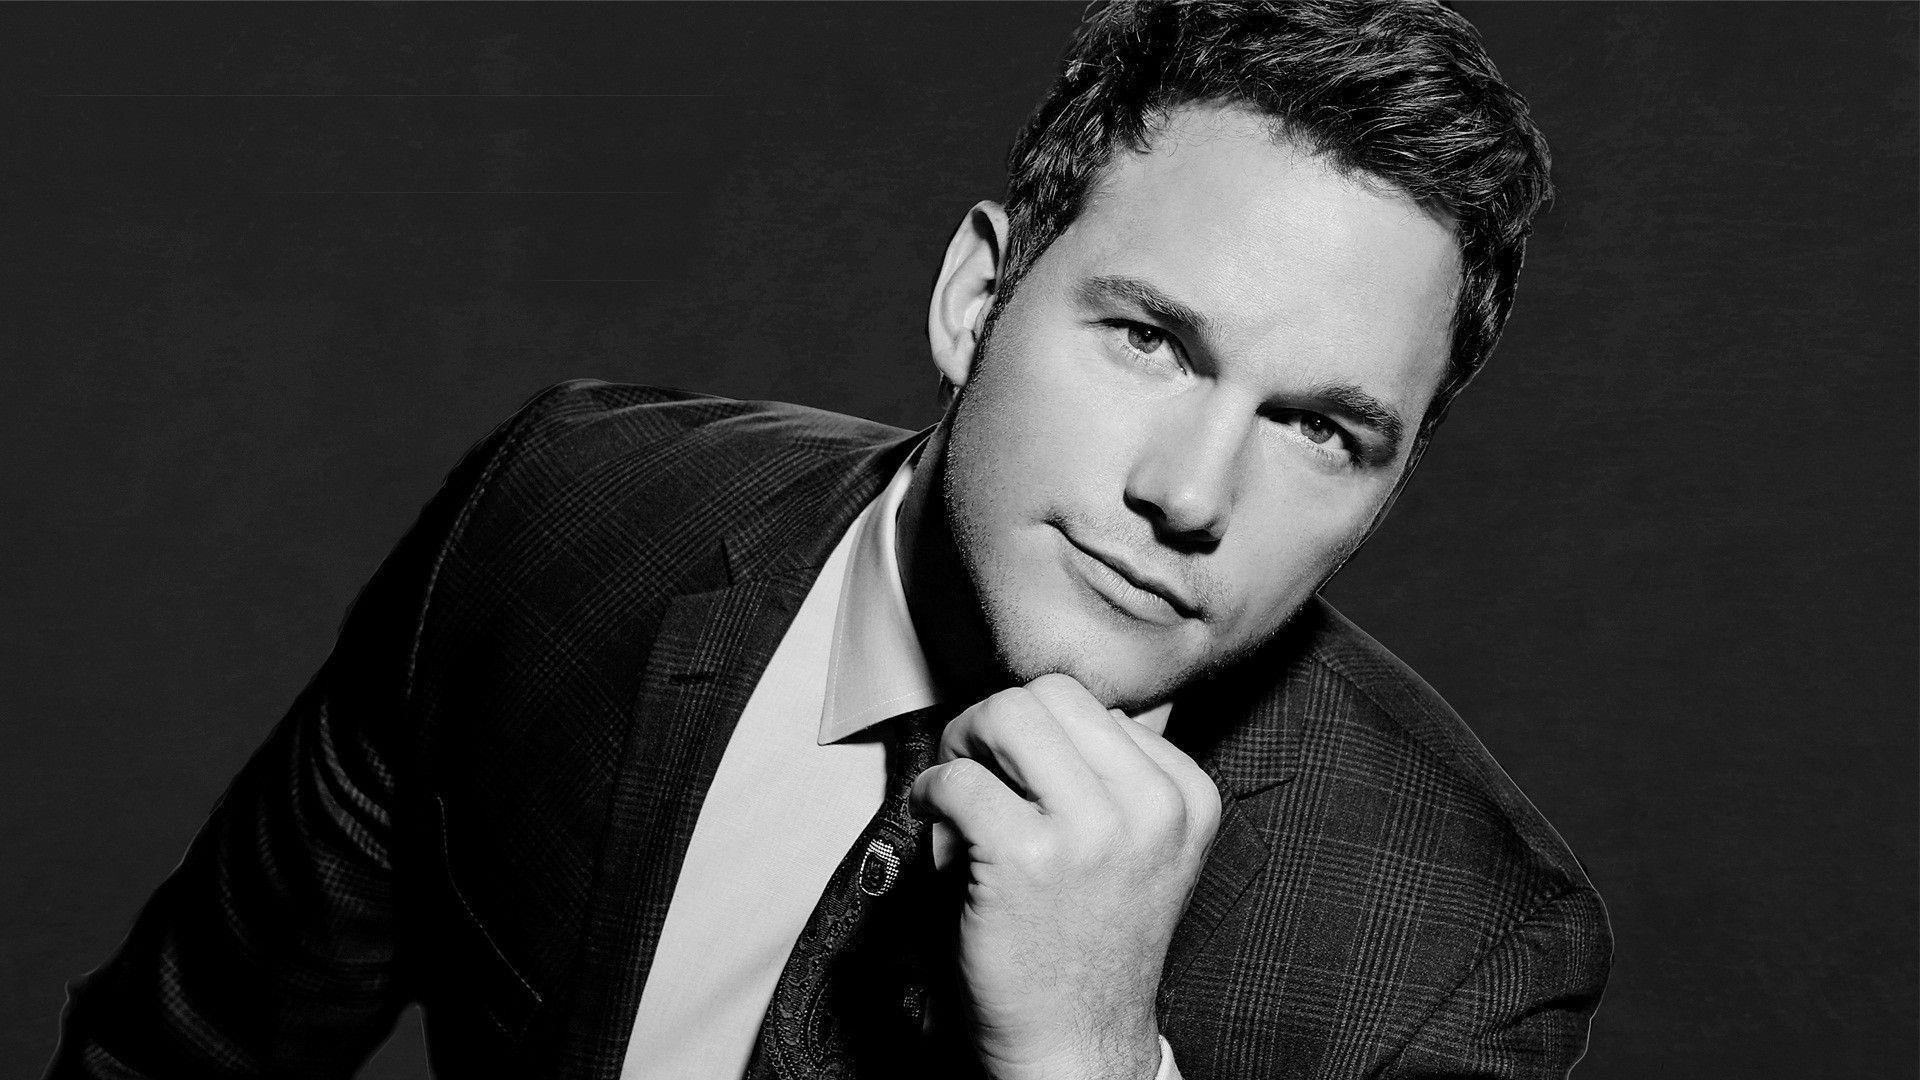 Chris Pratt: His notable films include “Zero Dark Thirty,” “Guardians of the Galaxy,” and “Jurassic Park”. 1920x1080 Full HD Background.